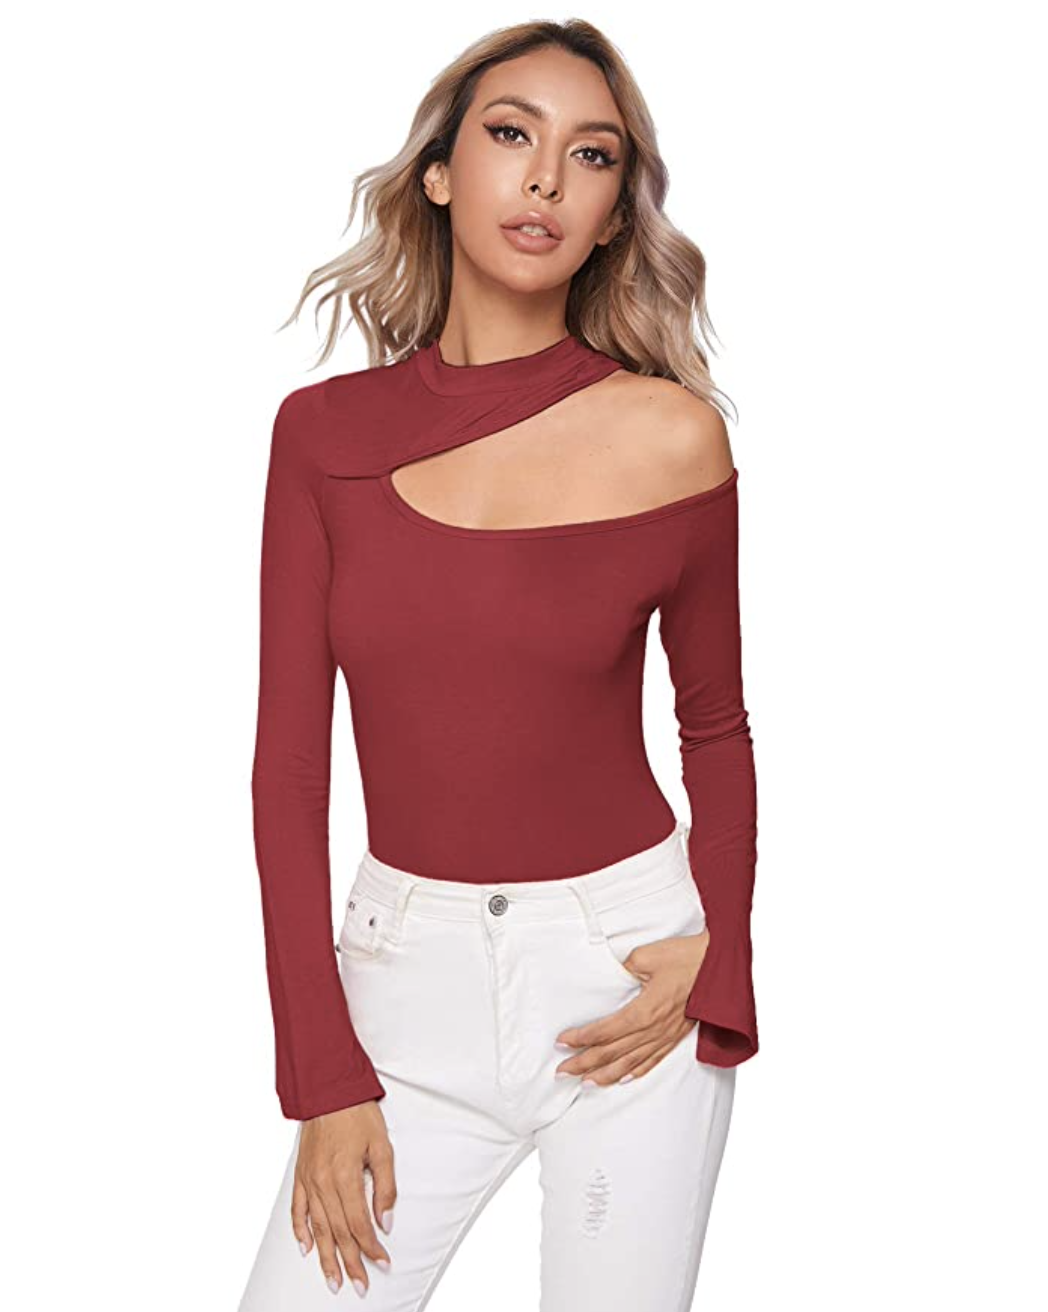 Red Shirts For Women Under $40 To Wear On Valentine’s Day — Shop ...